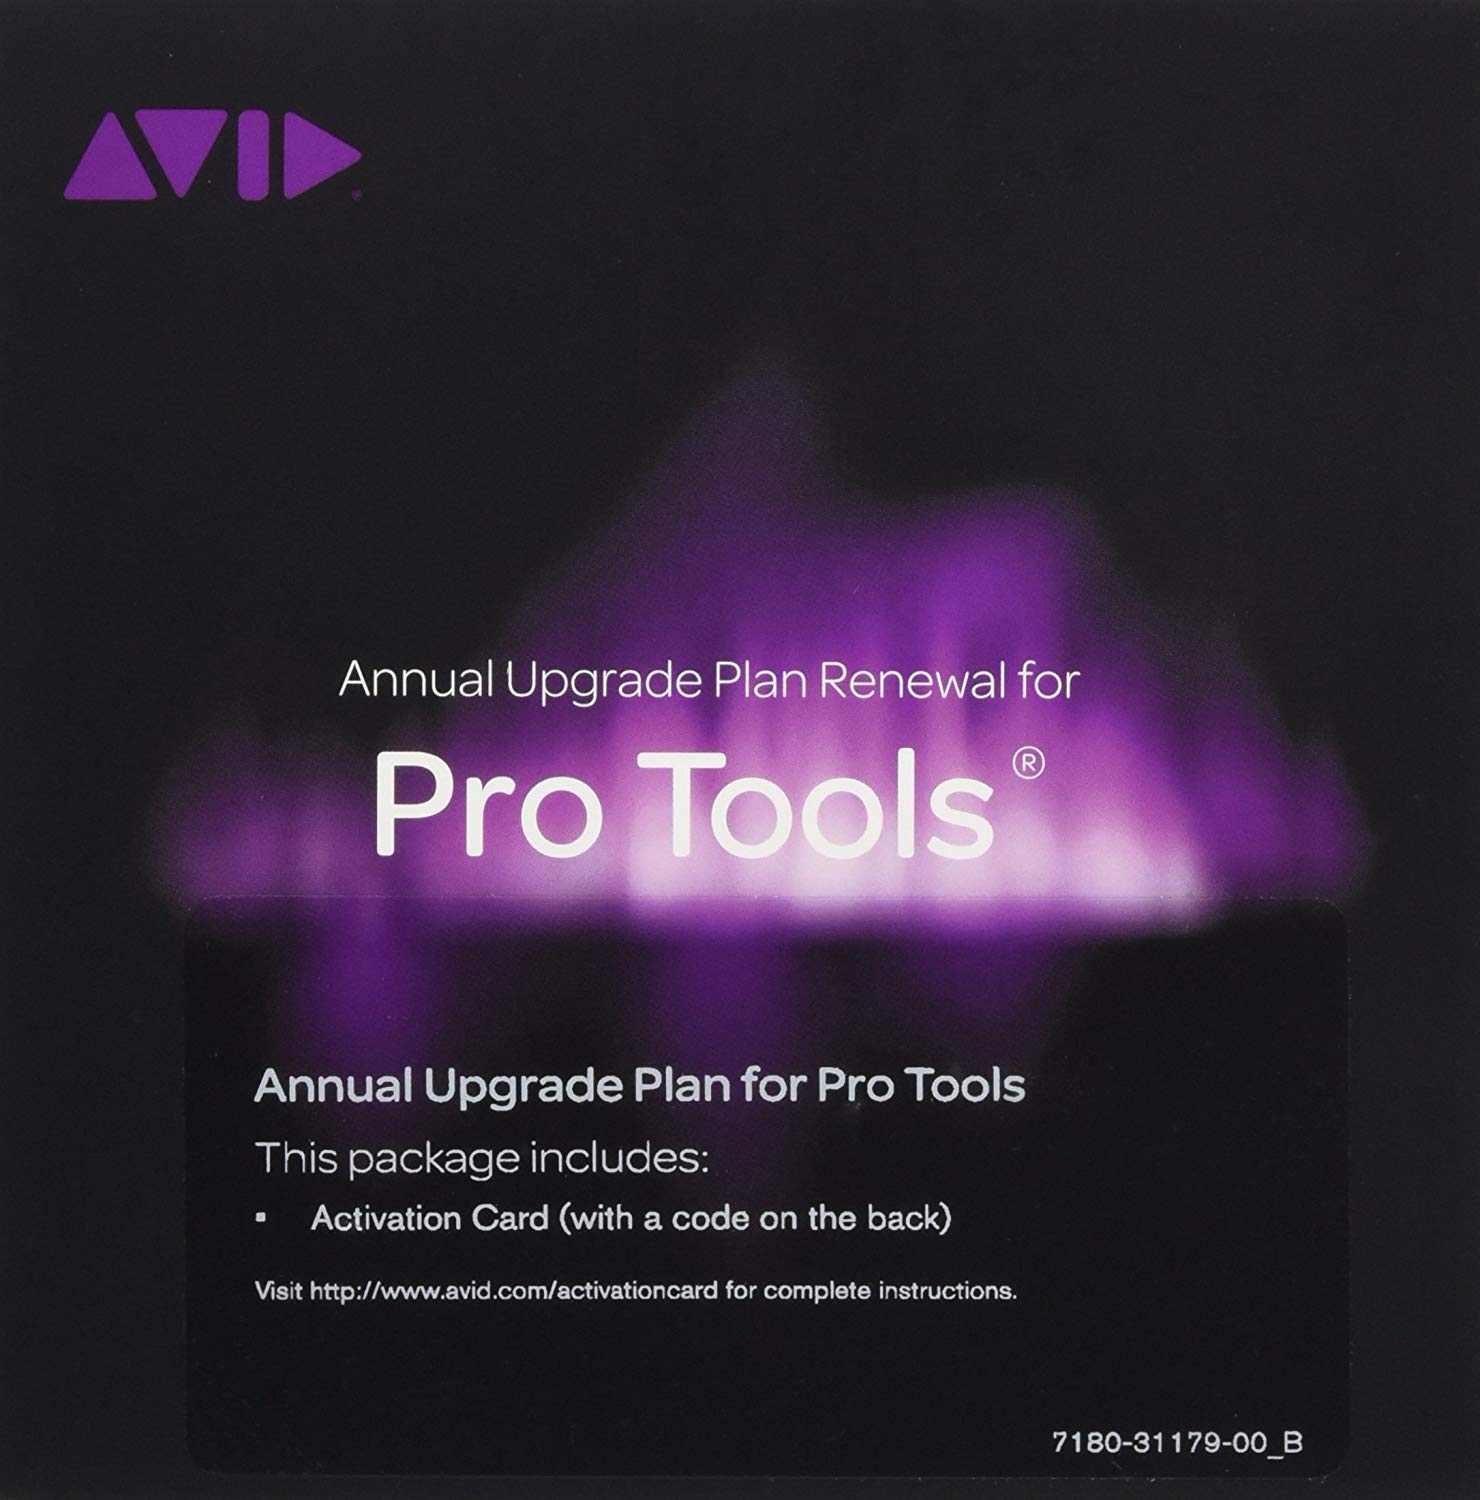 iڍ F AVID/y\tgEFA/Pro Tools 2018pXV iCZXpiPro Tools 1-Year SoftwareUpdates + Support Plan RENEWAL,for Perpetual Licenses before your active plan endsj